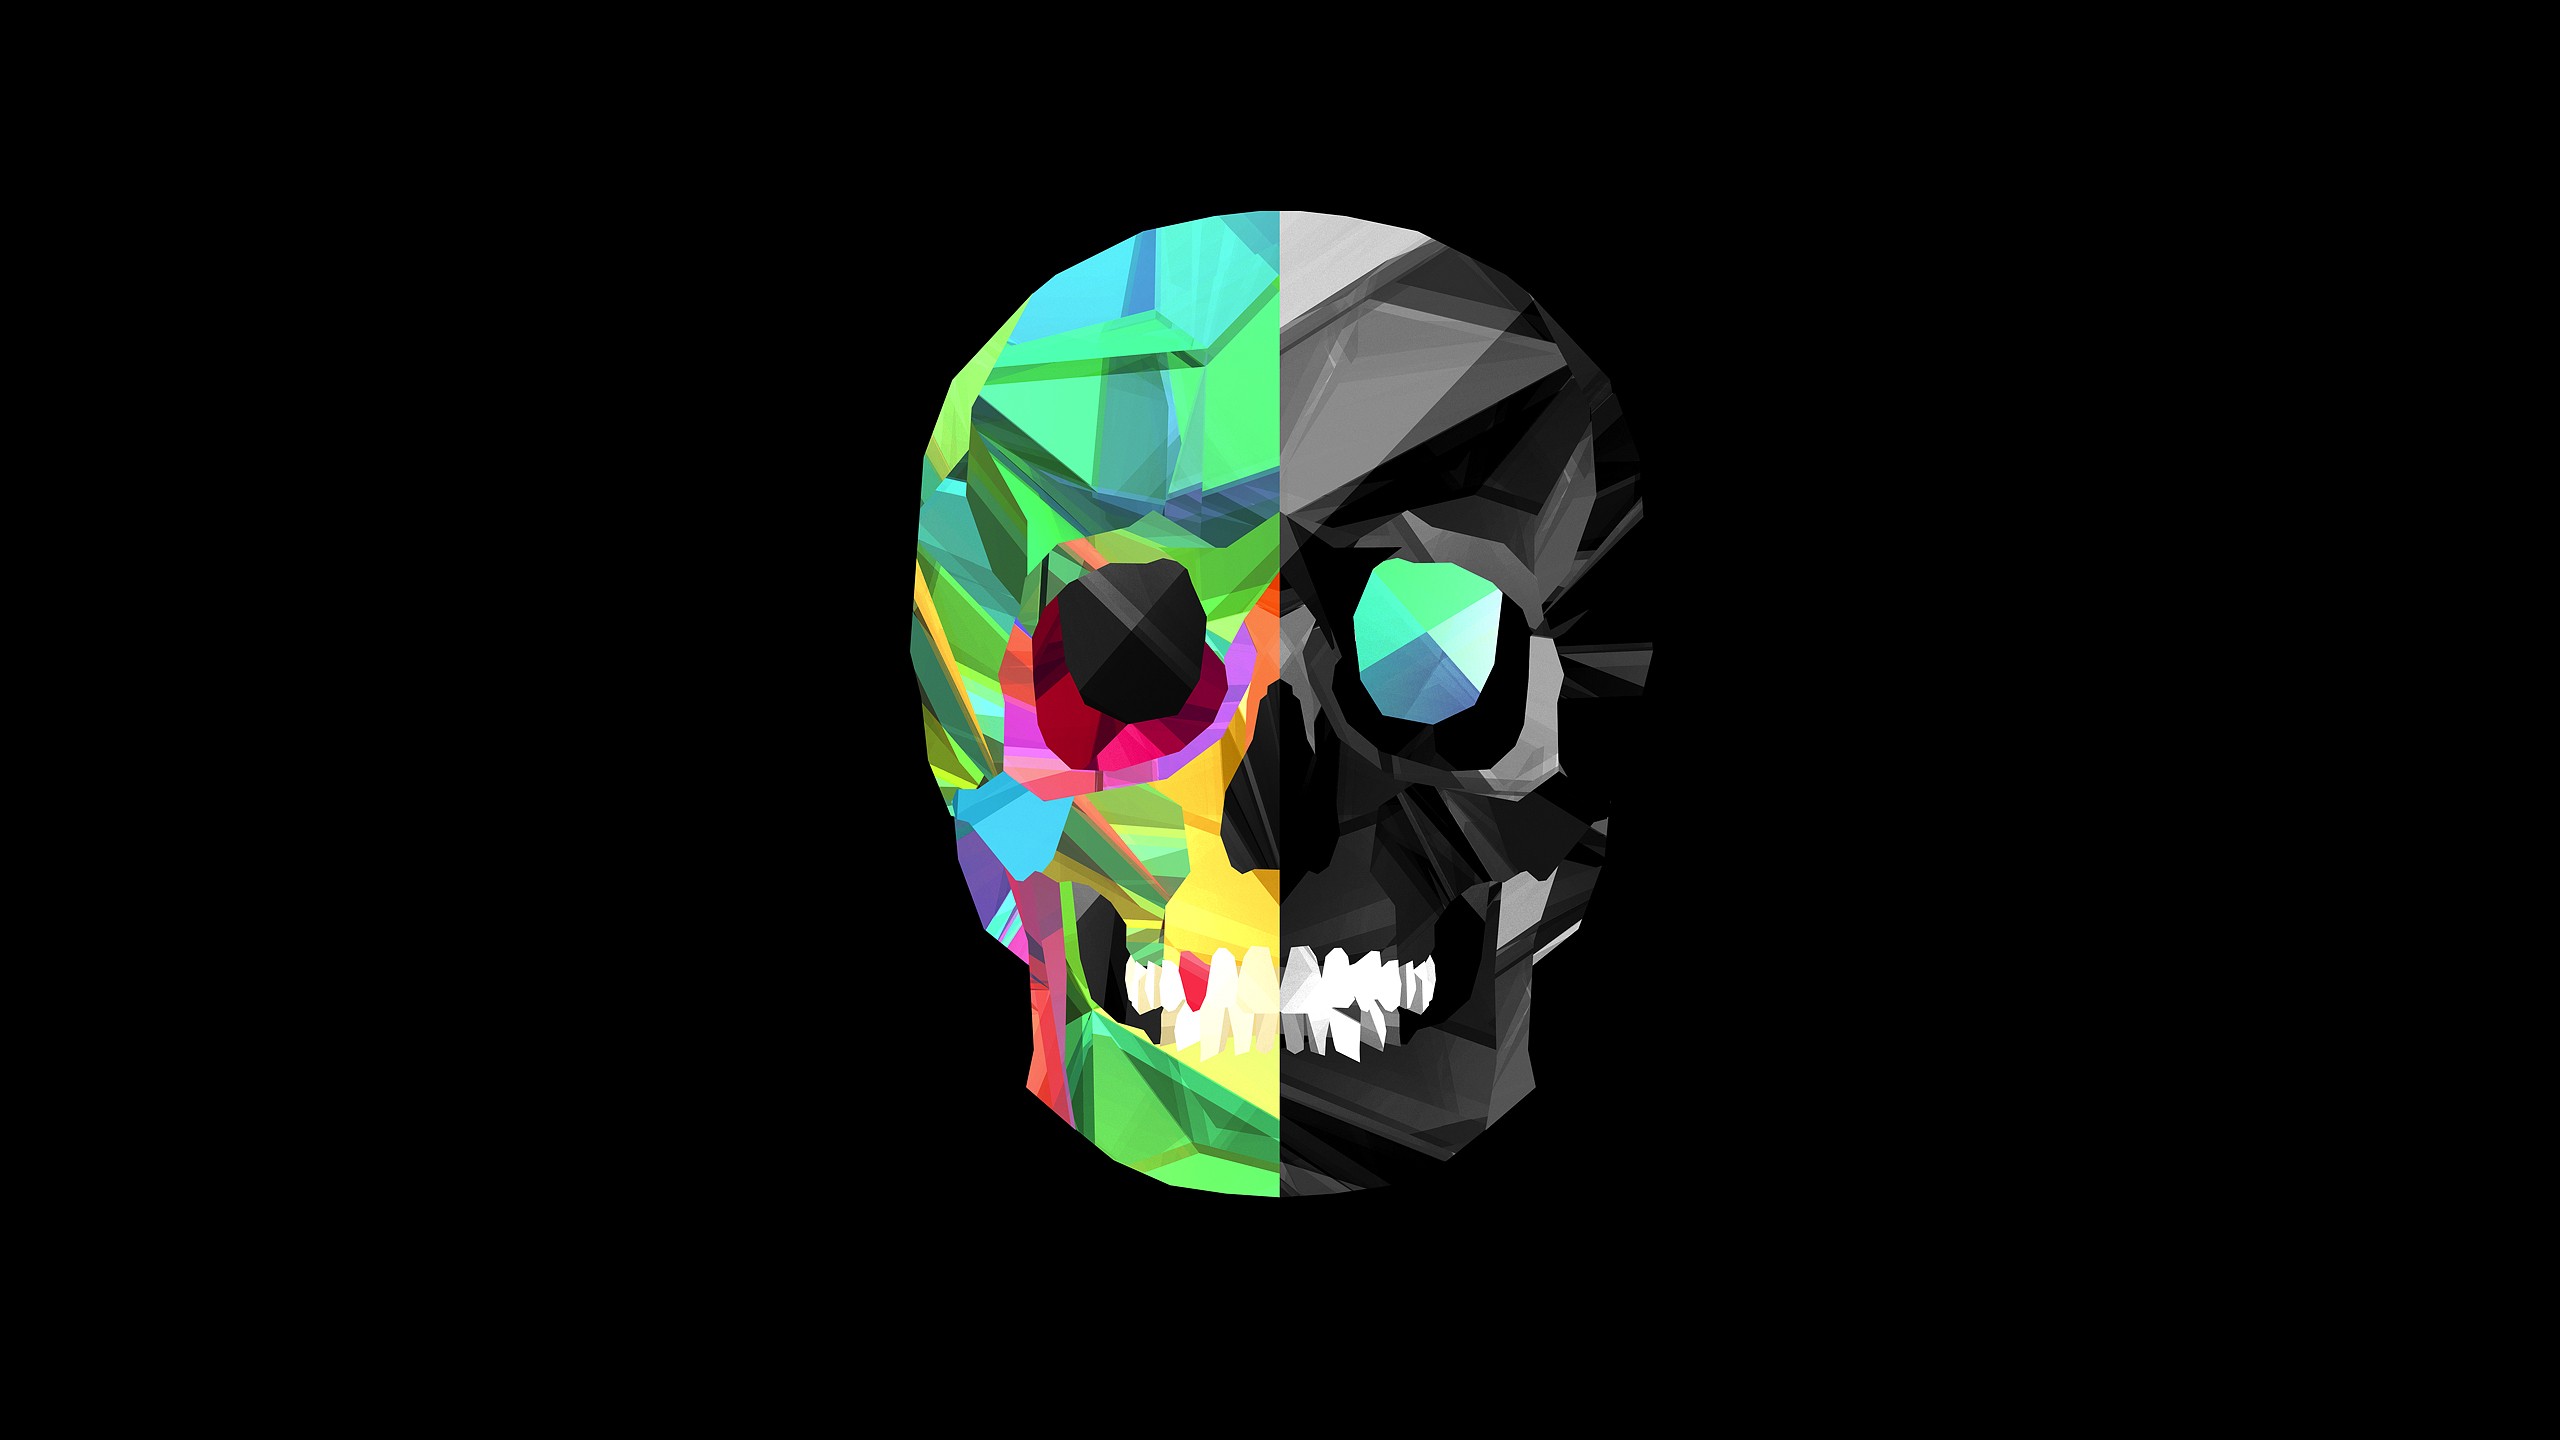 General 2560x1440 skull Justin Maller black background minimalism simple background digital art facets CGI 3D Abstract abstract